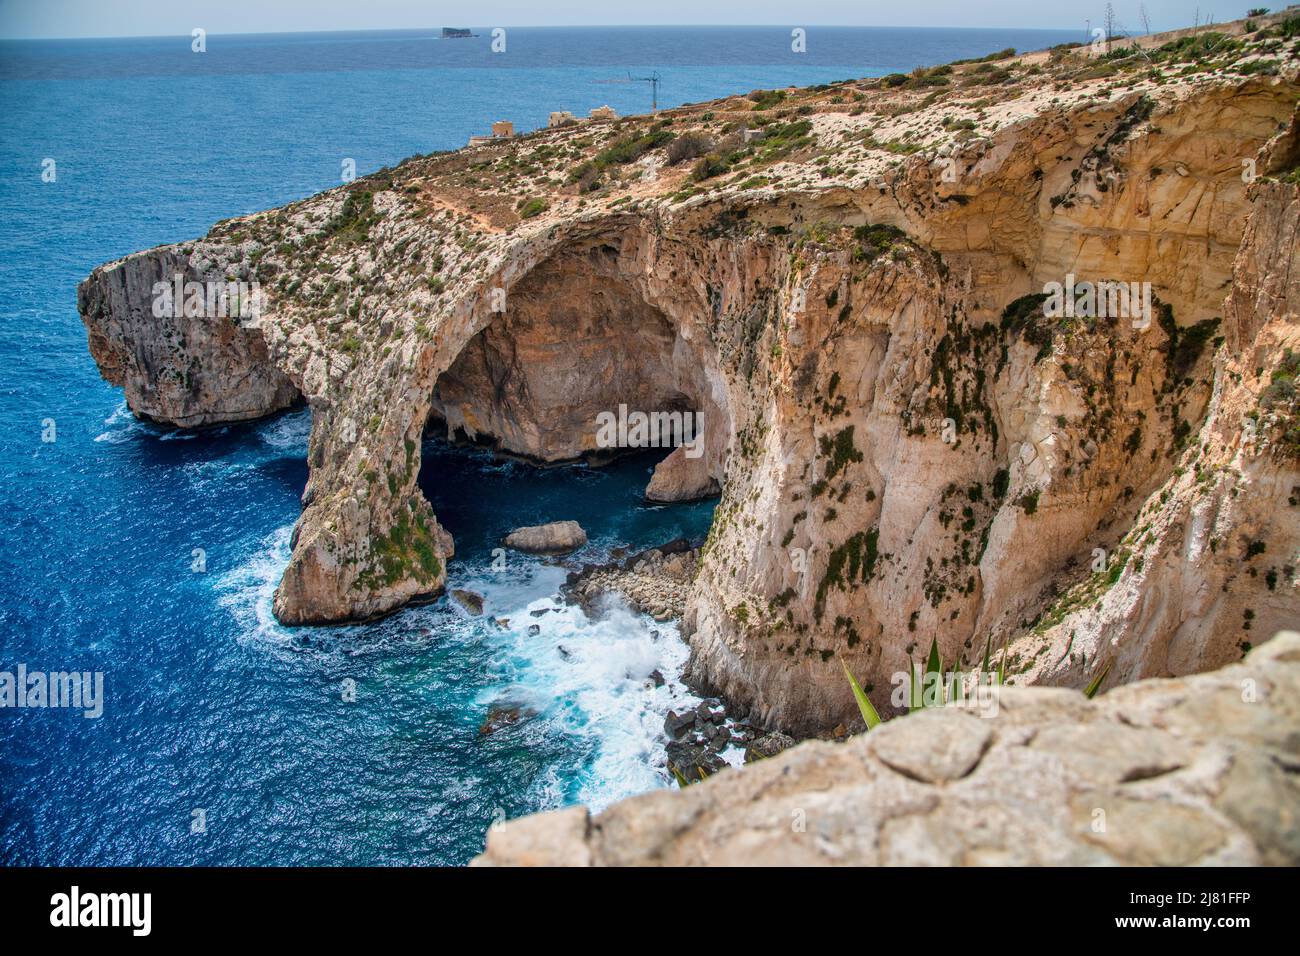 The Blue Grotto aerial view in Malta. Stock Photo